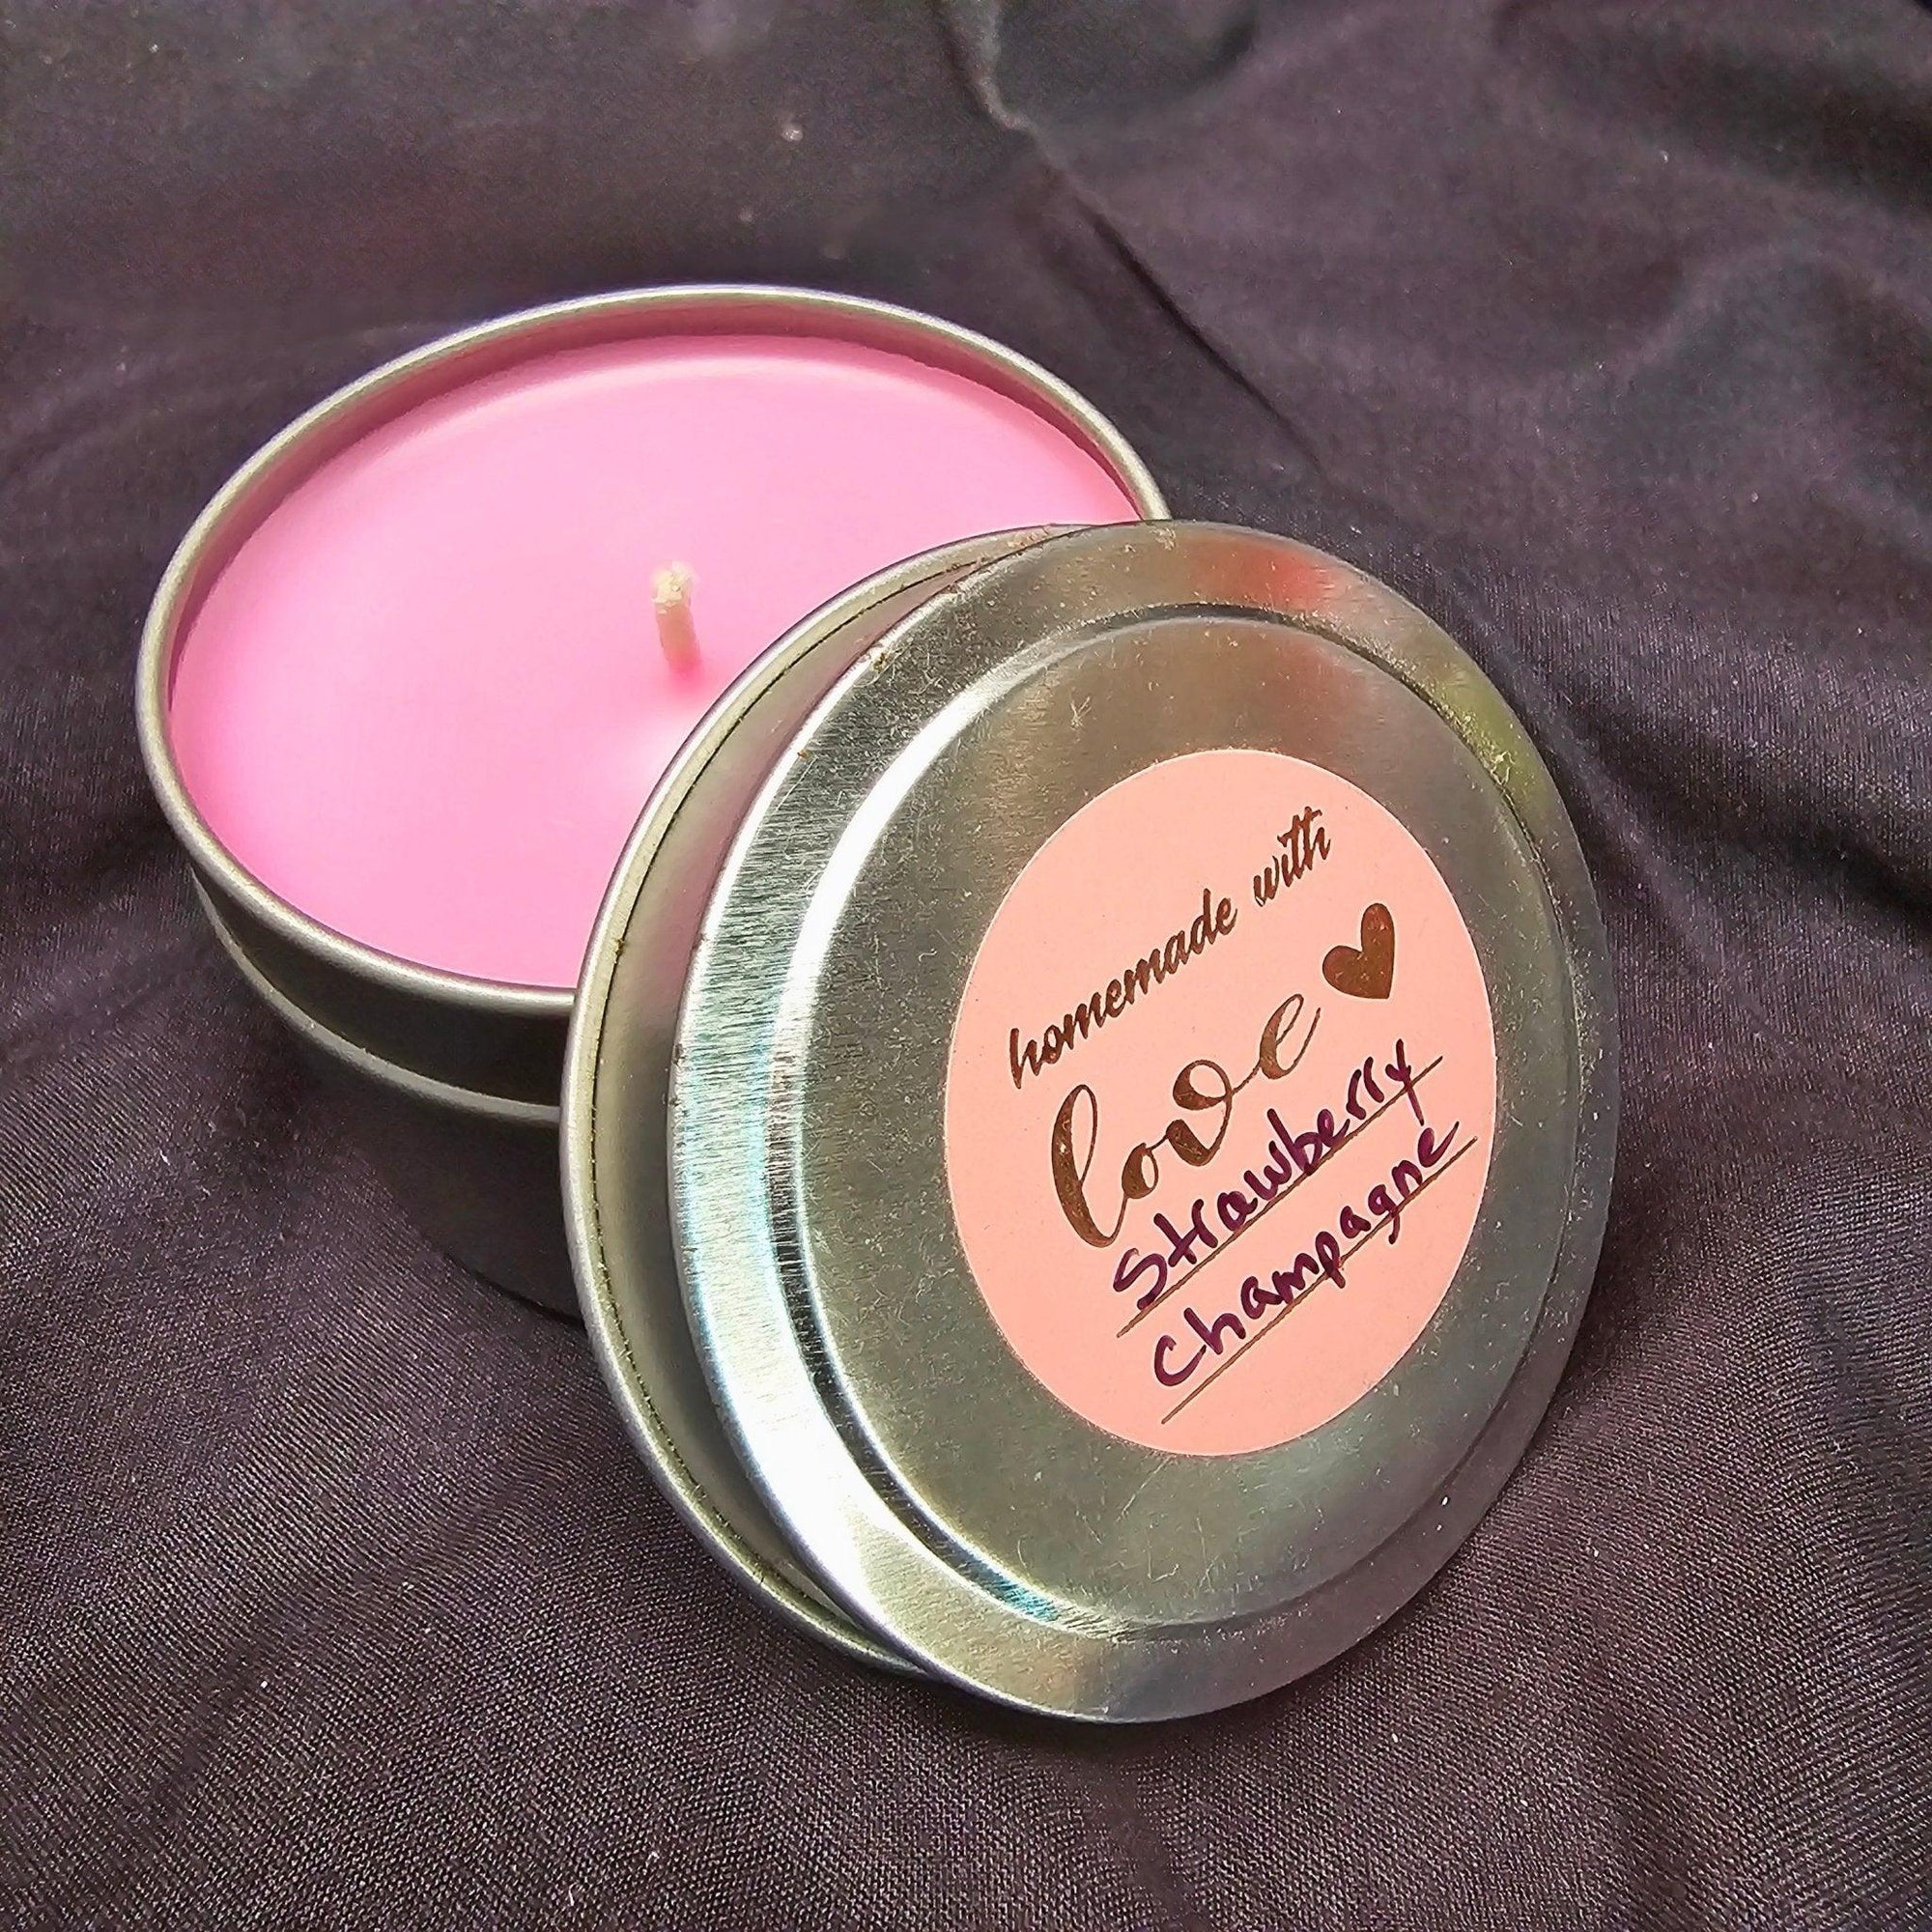 8oz. Candle Tin - Strawberry Champagne Tin Container Candle Flamingwick Candles & Wax Melts   